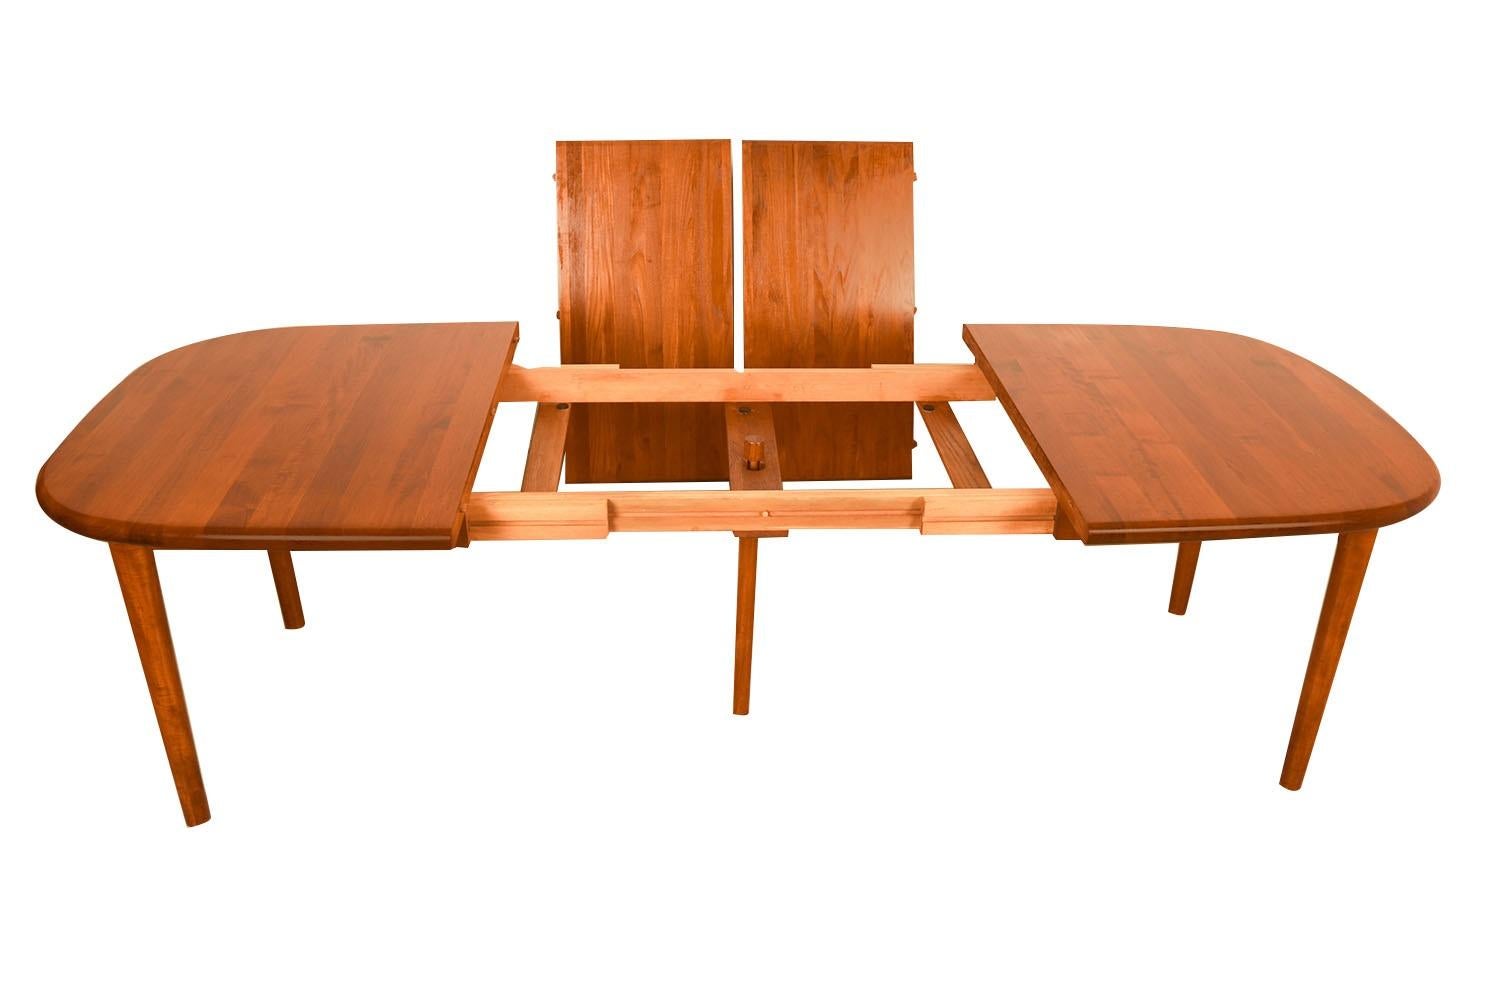 Beautiful Mid-Century Modern teak rounded corners rectangle expandable dining table, circa 1970’s. Featuring richly grained, gleaming teak and smooth, clean lines characteristic of classic Danish design. This remarkable dining table comes with two